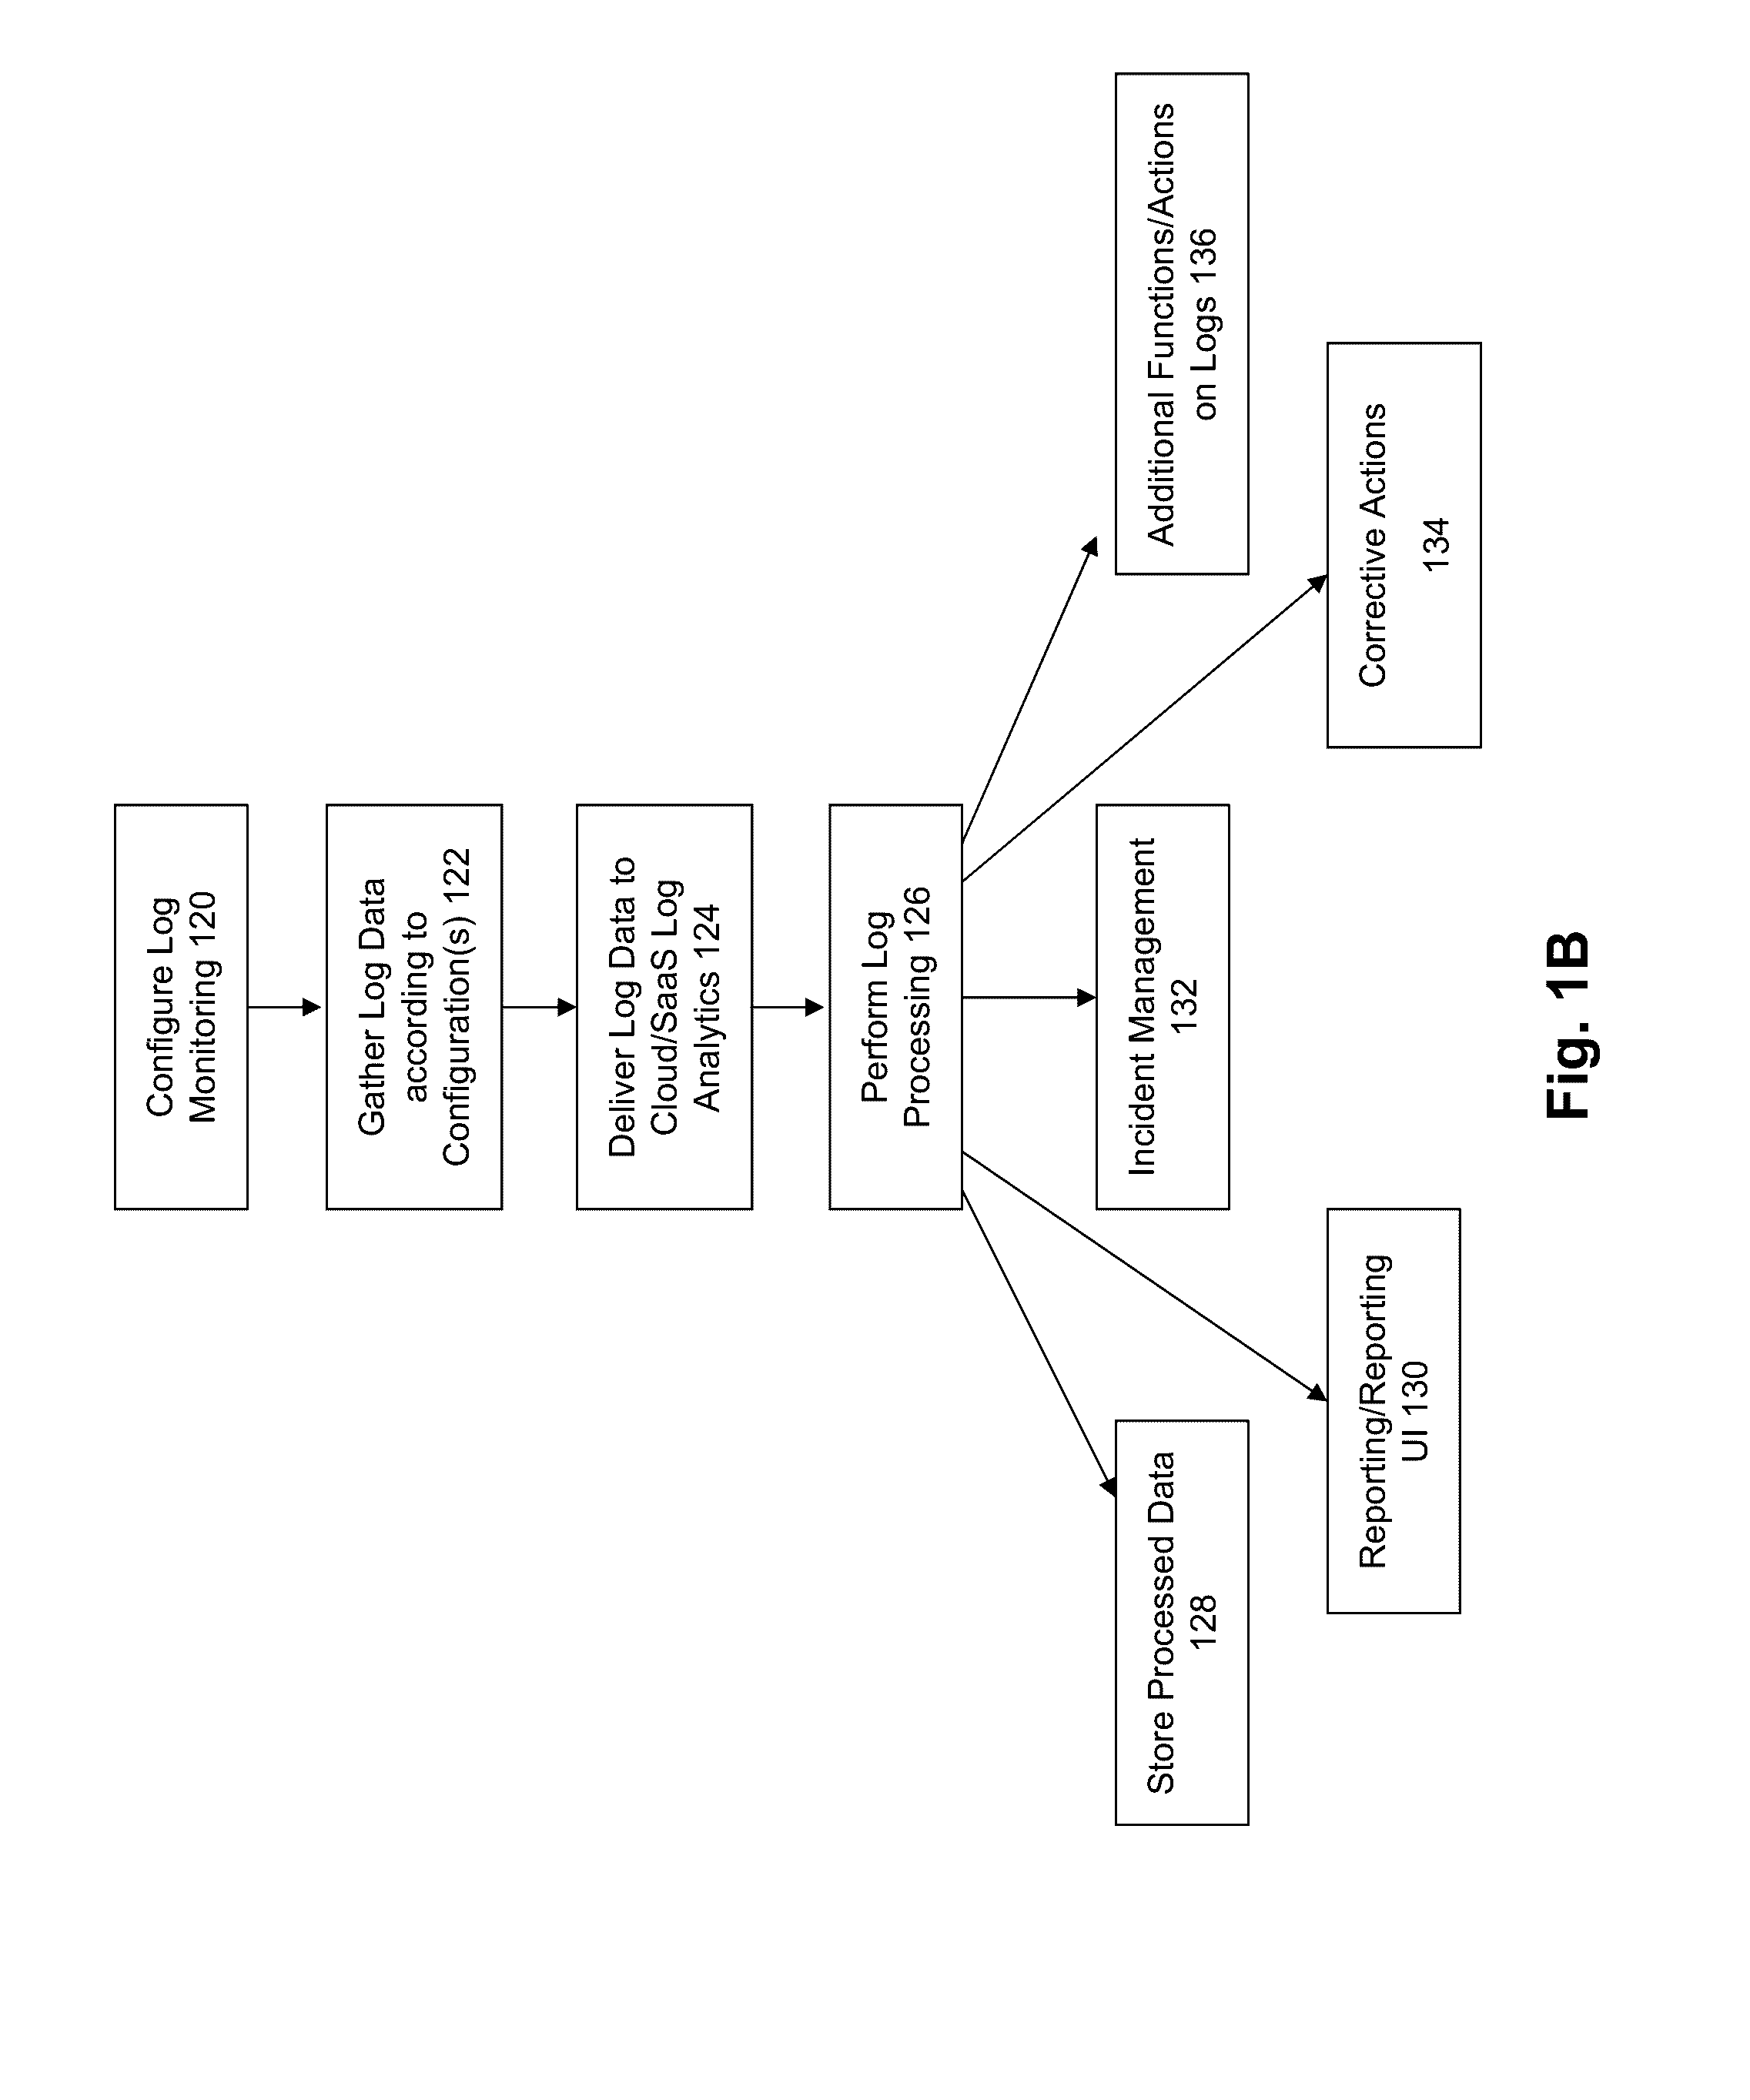 Method and system for parameterizing log file location assignments for a log analytics system